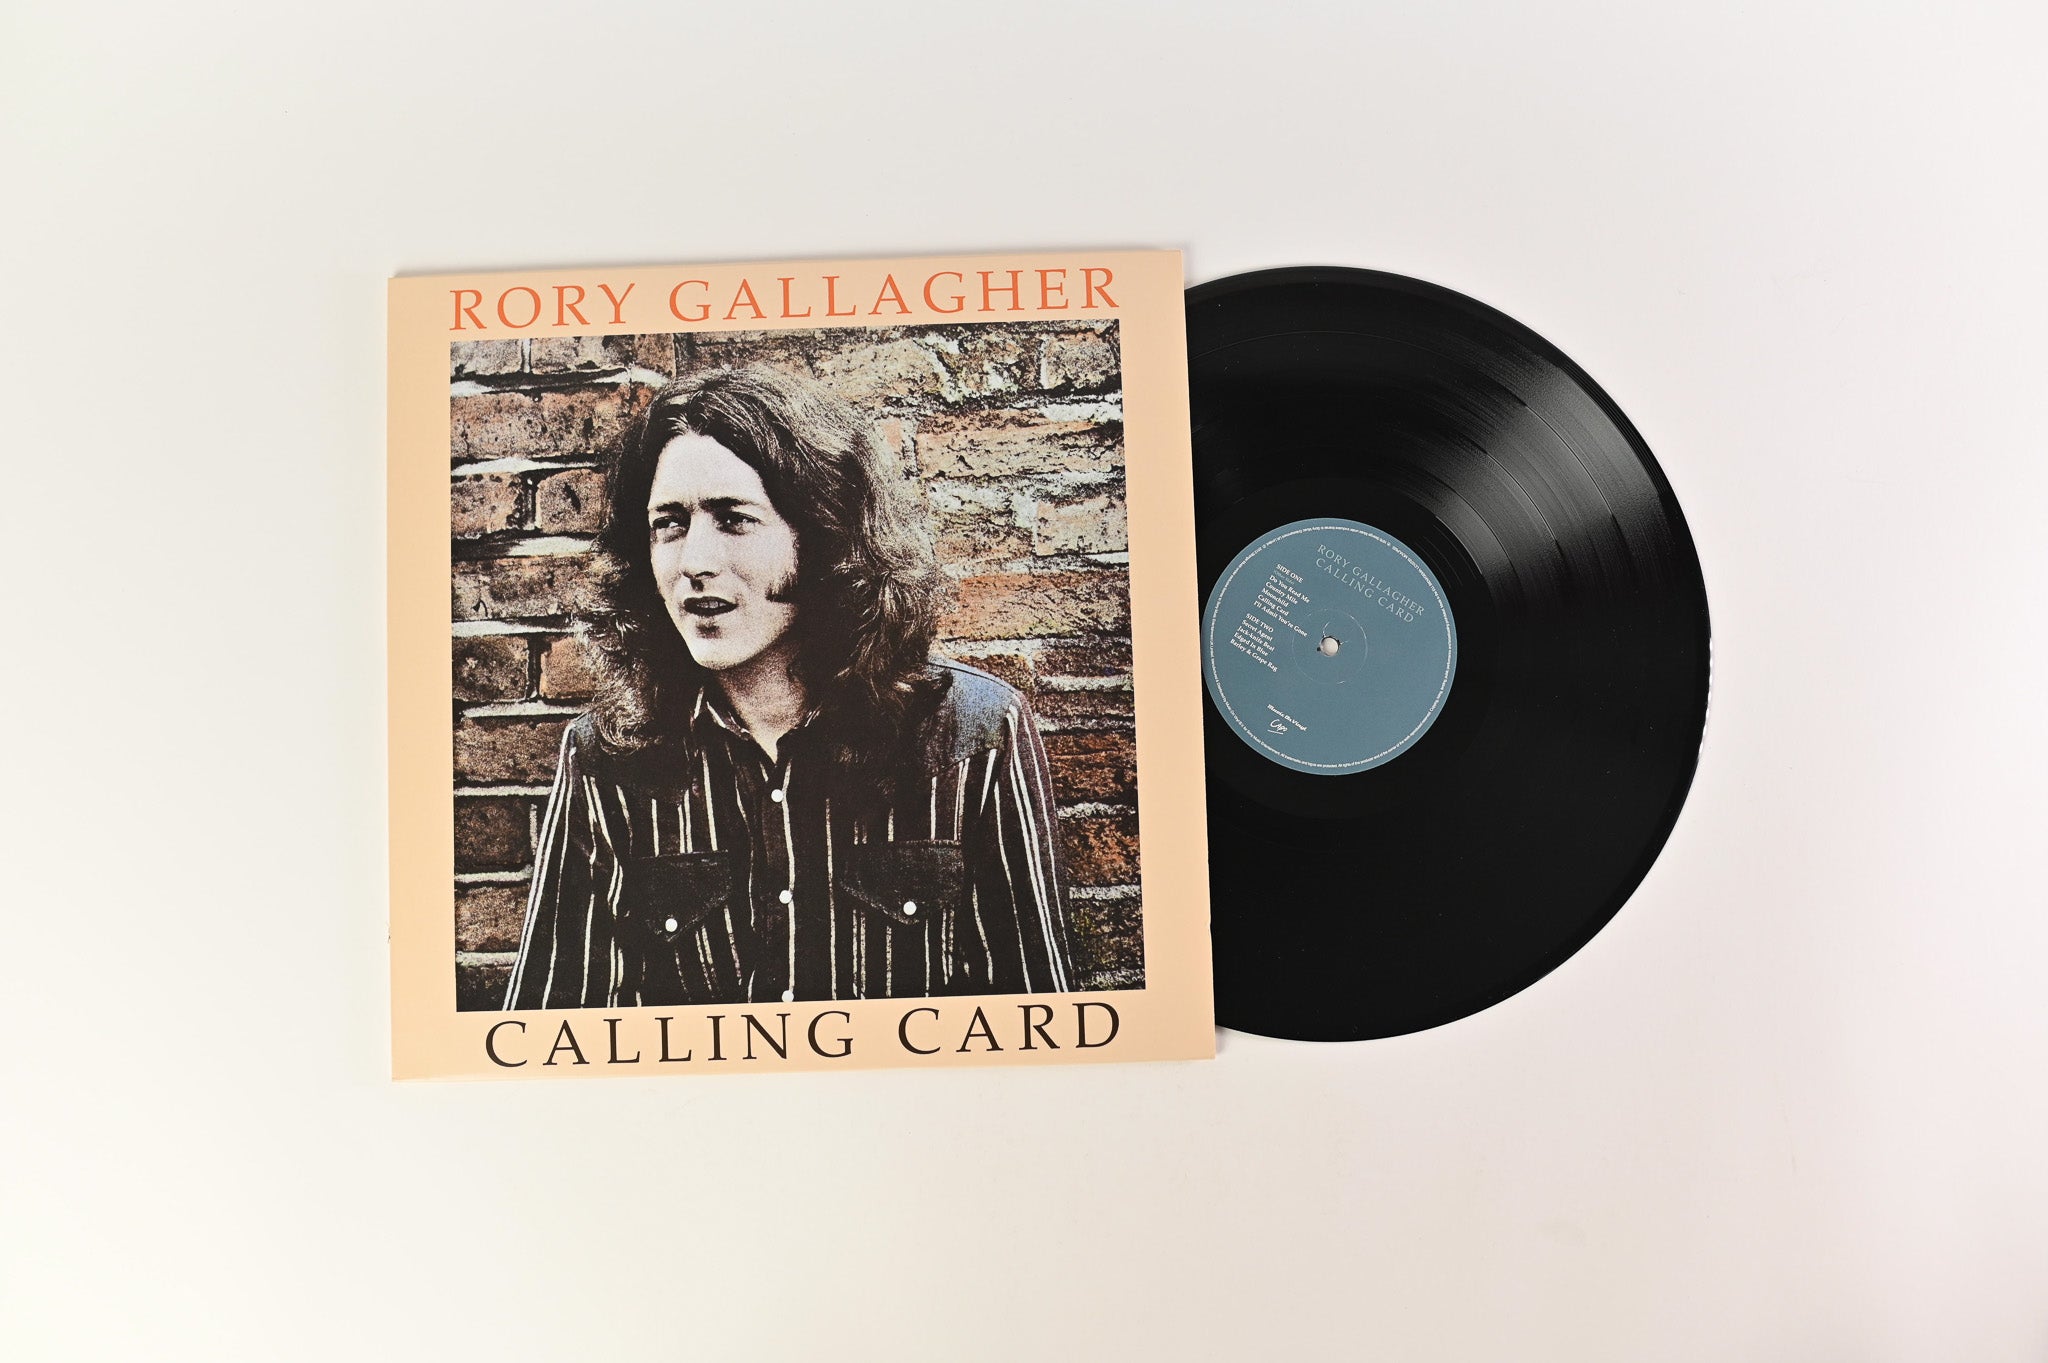 Rory Gallagher - Calling Card on Music On Vinyl